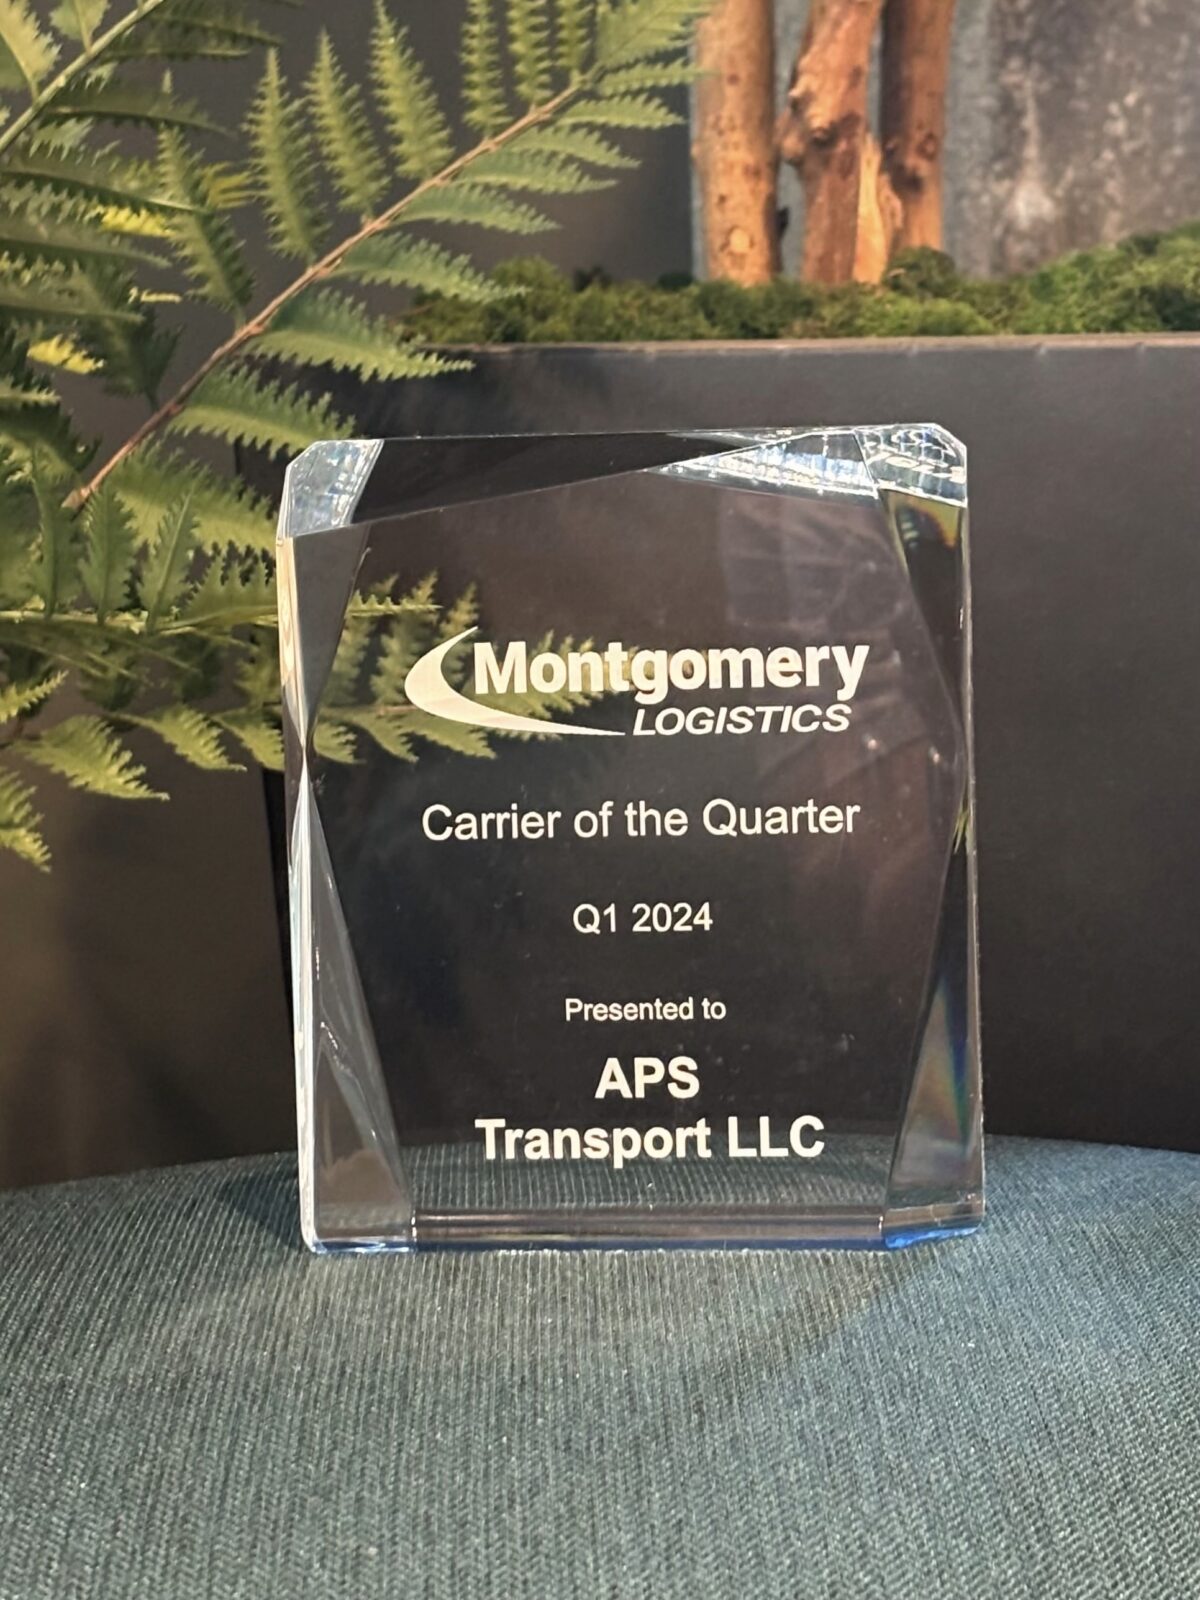 MONTGOMERY LOGISTICS NAMED APS Transport LLC AS 2024 Q1 CARRIER OF THE QUARTER